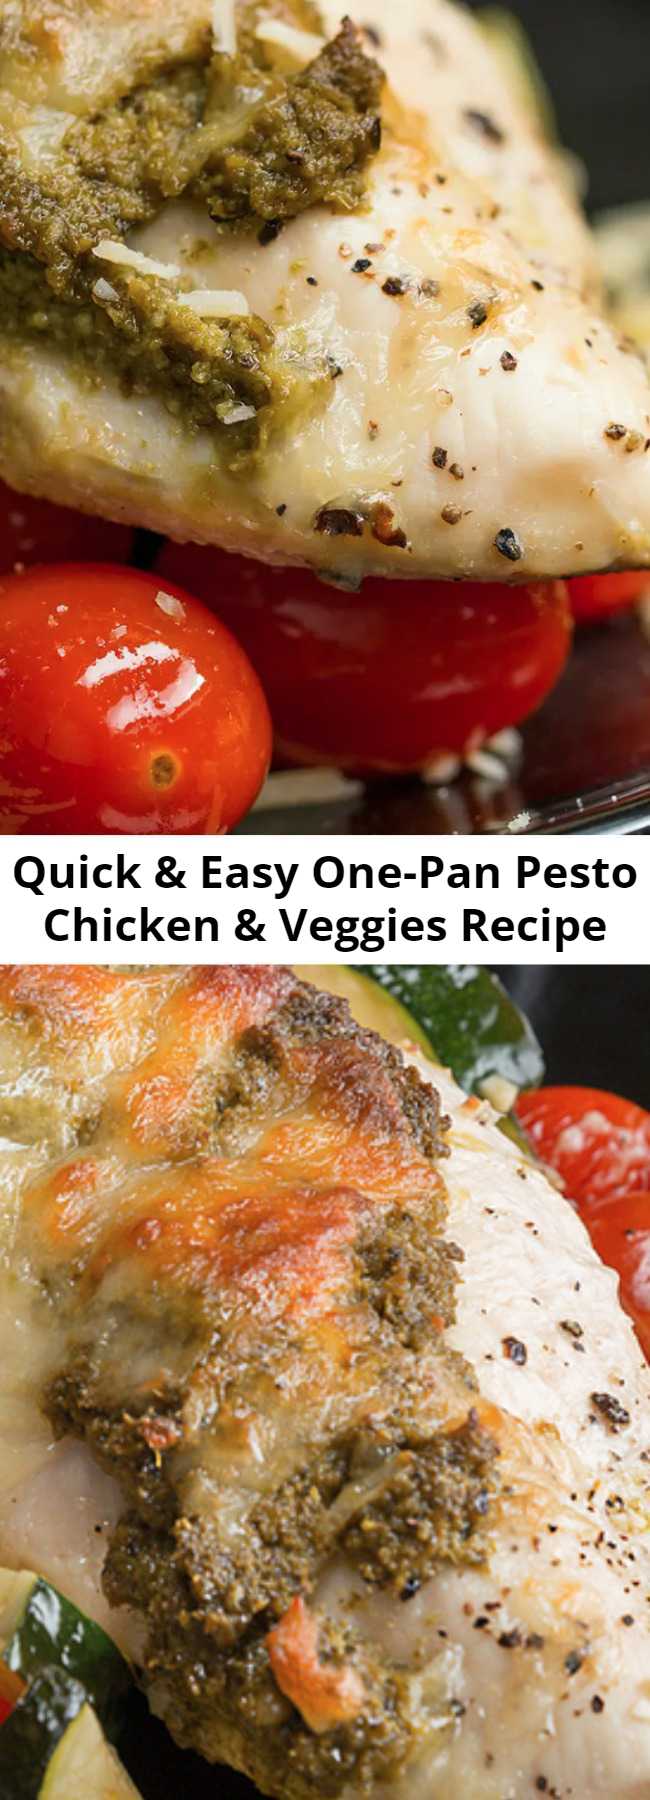 Quick & Easy One-Pan Pesto Chicken & Veggies Recipe - Here's a quick and easy dinner that is full of flavor!